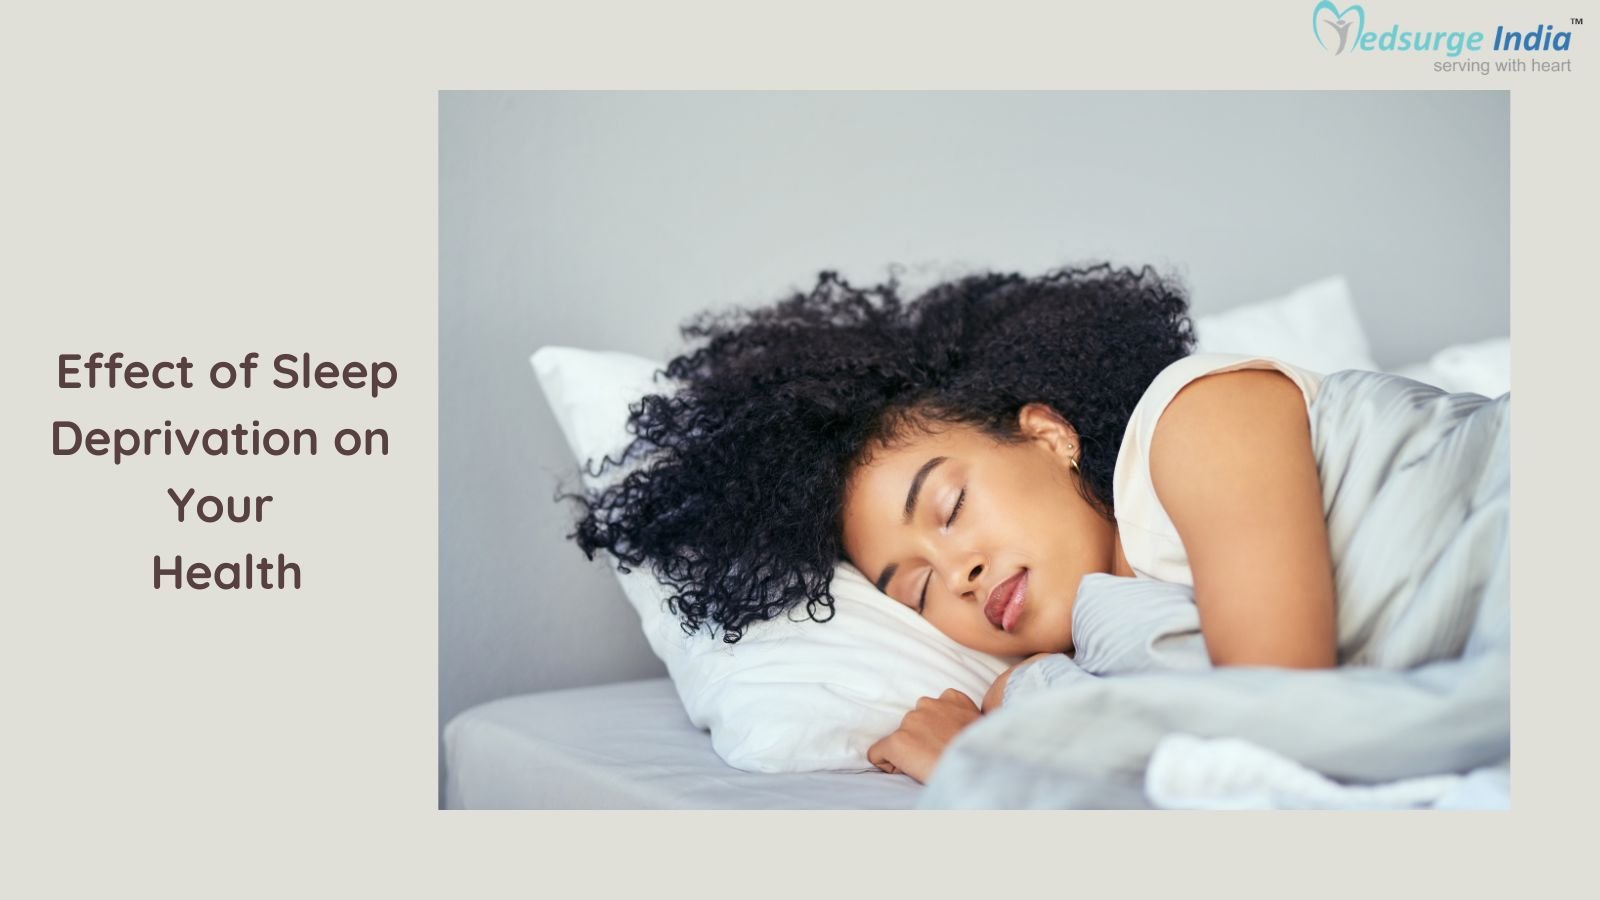 Effect of Sleep Deprivation on Your Health